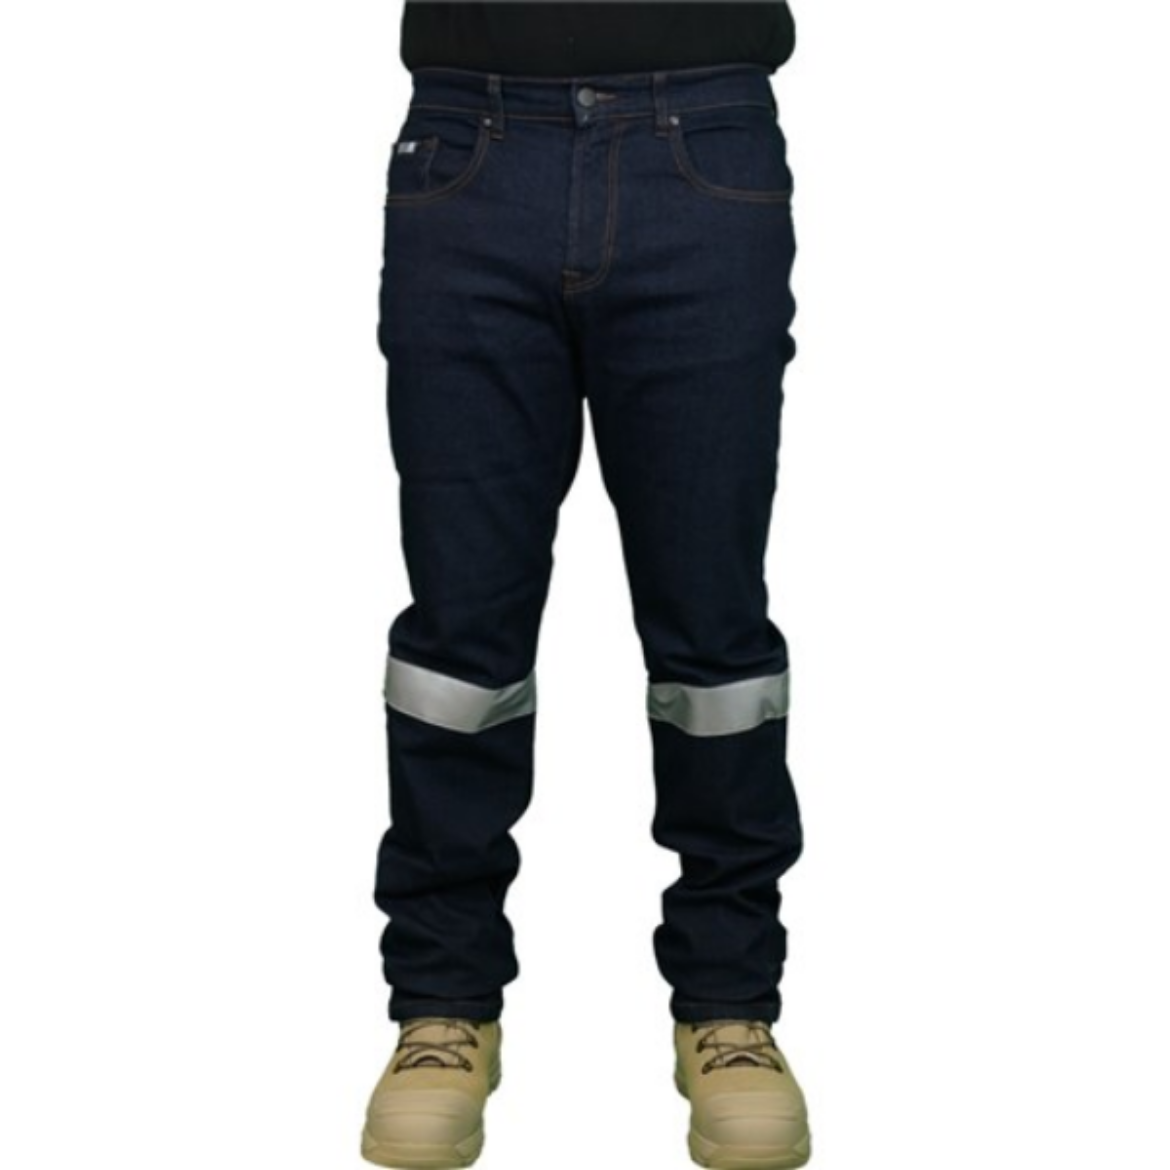 Picture of DARK DENIM STRAIGH LET STRETCH TAPED JEANS, CLASSIC FIT.  AVAILABLE IN SIZES 77 -112R, 87 - 132S AND 74 -94L